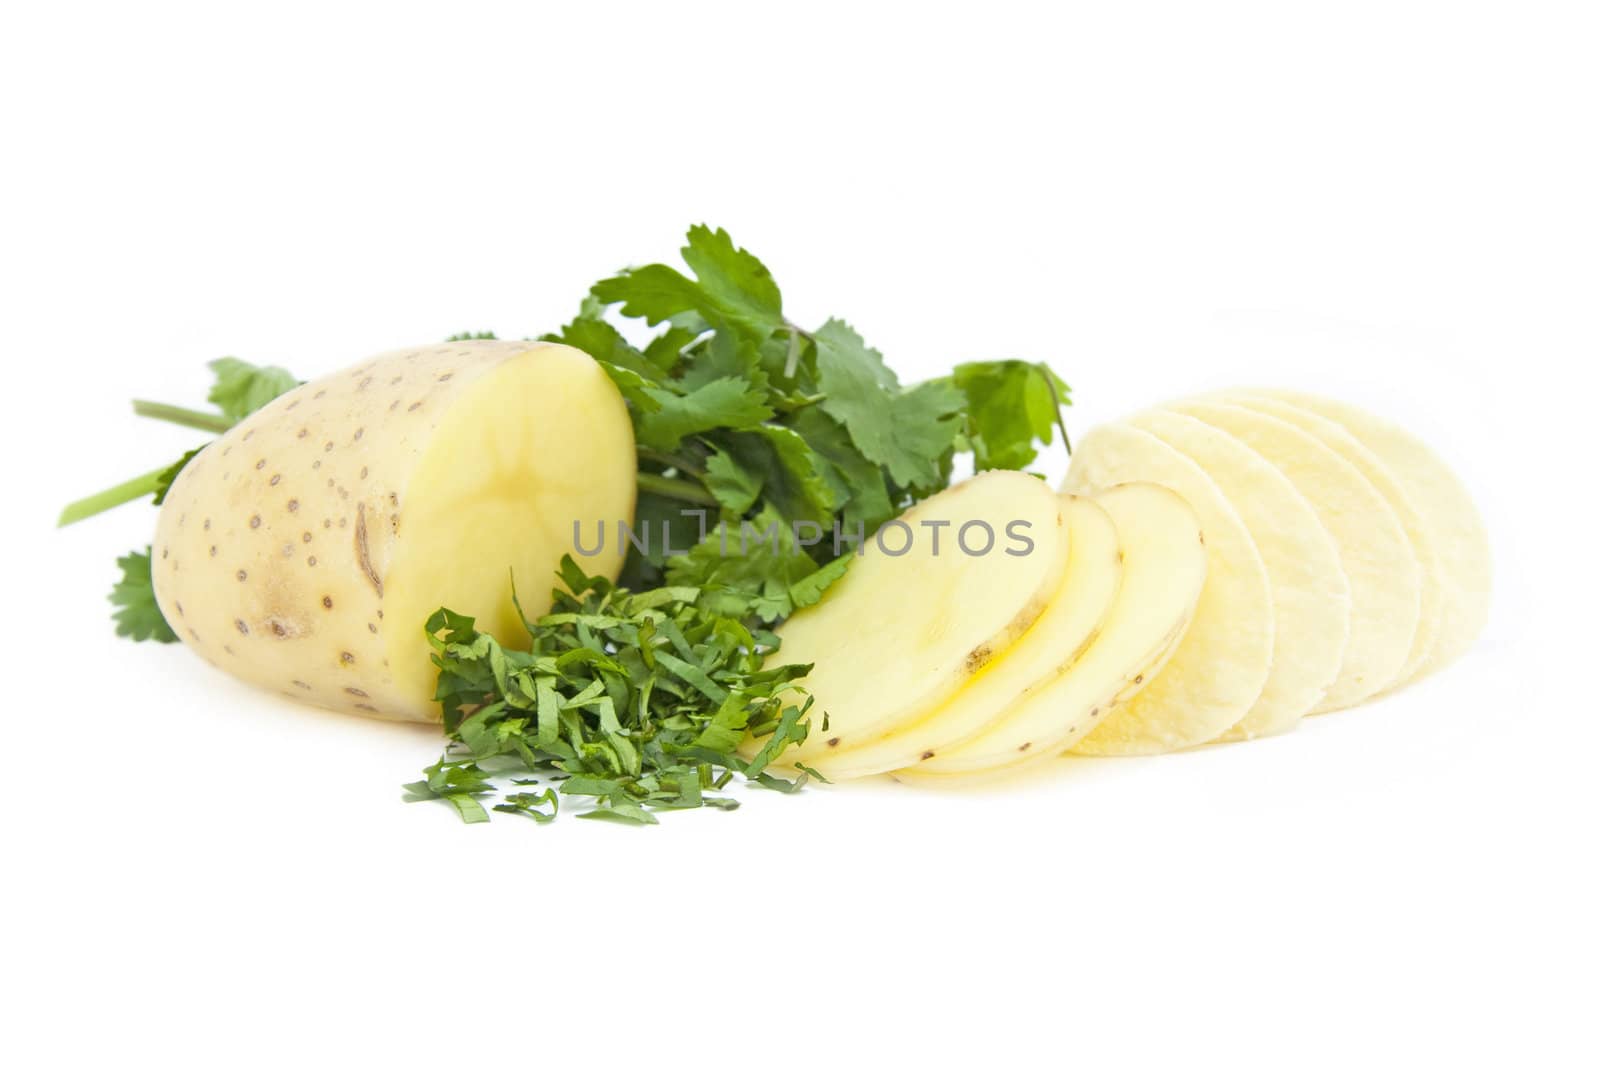 Potato, herbs and crisps by ChrisAlleaume